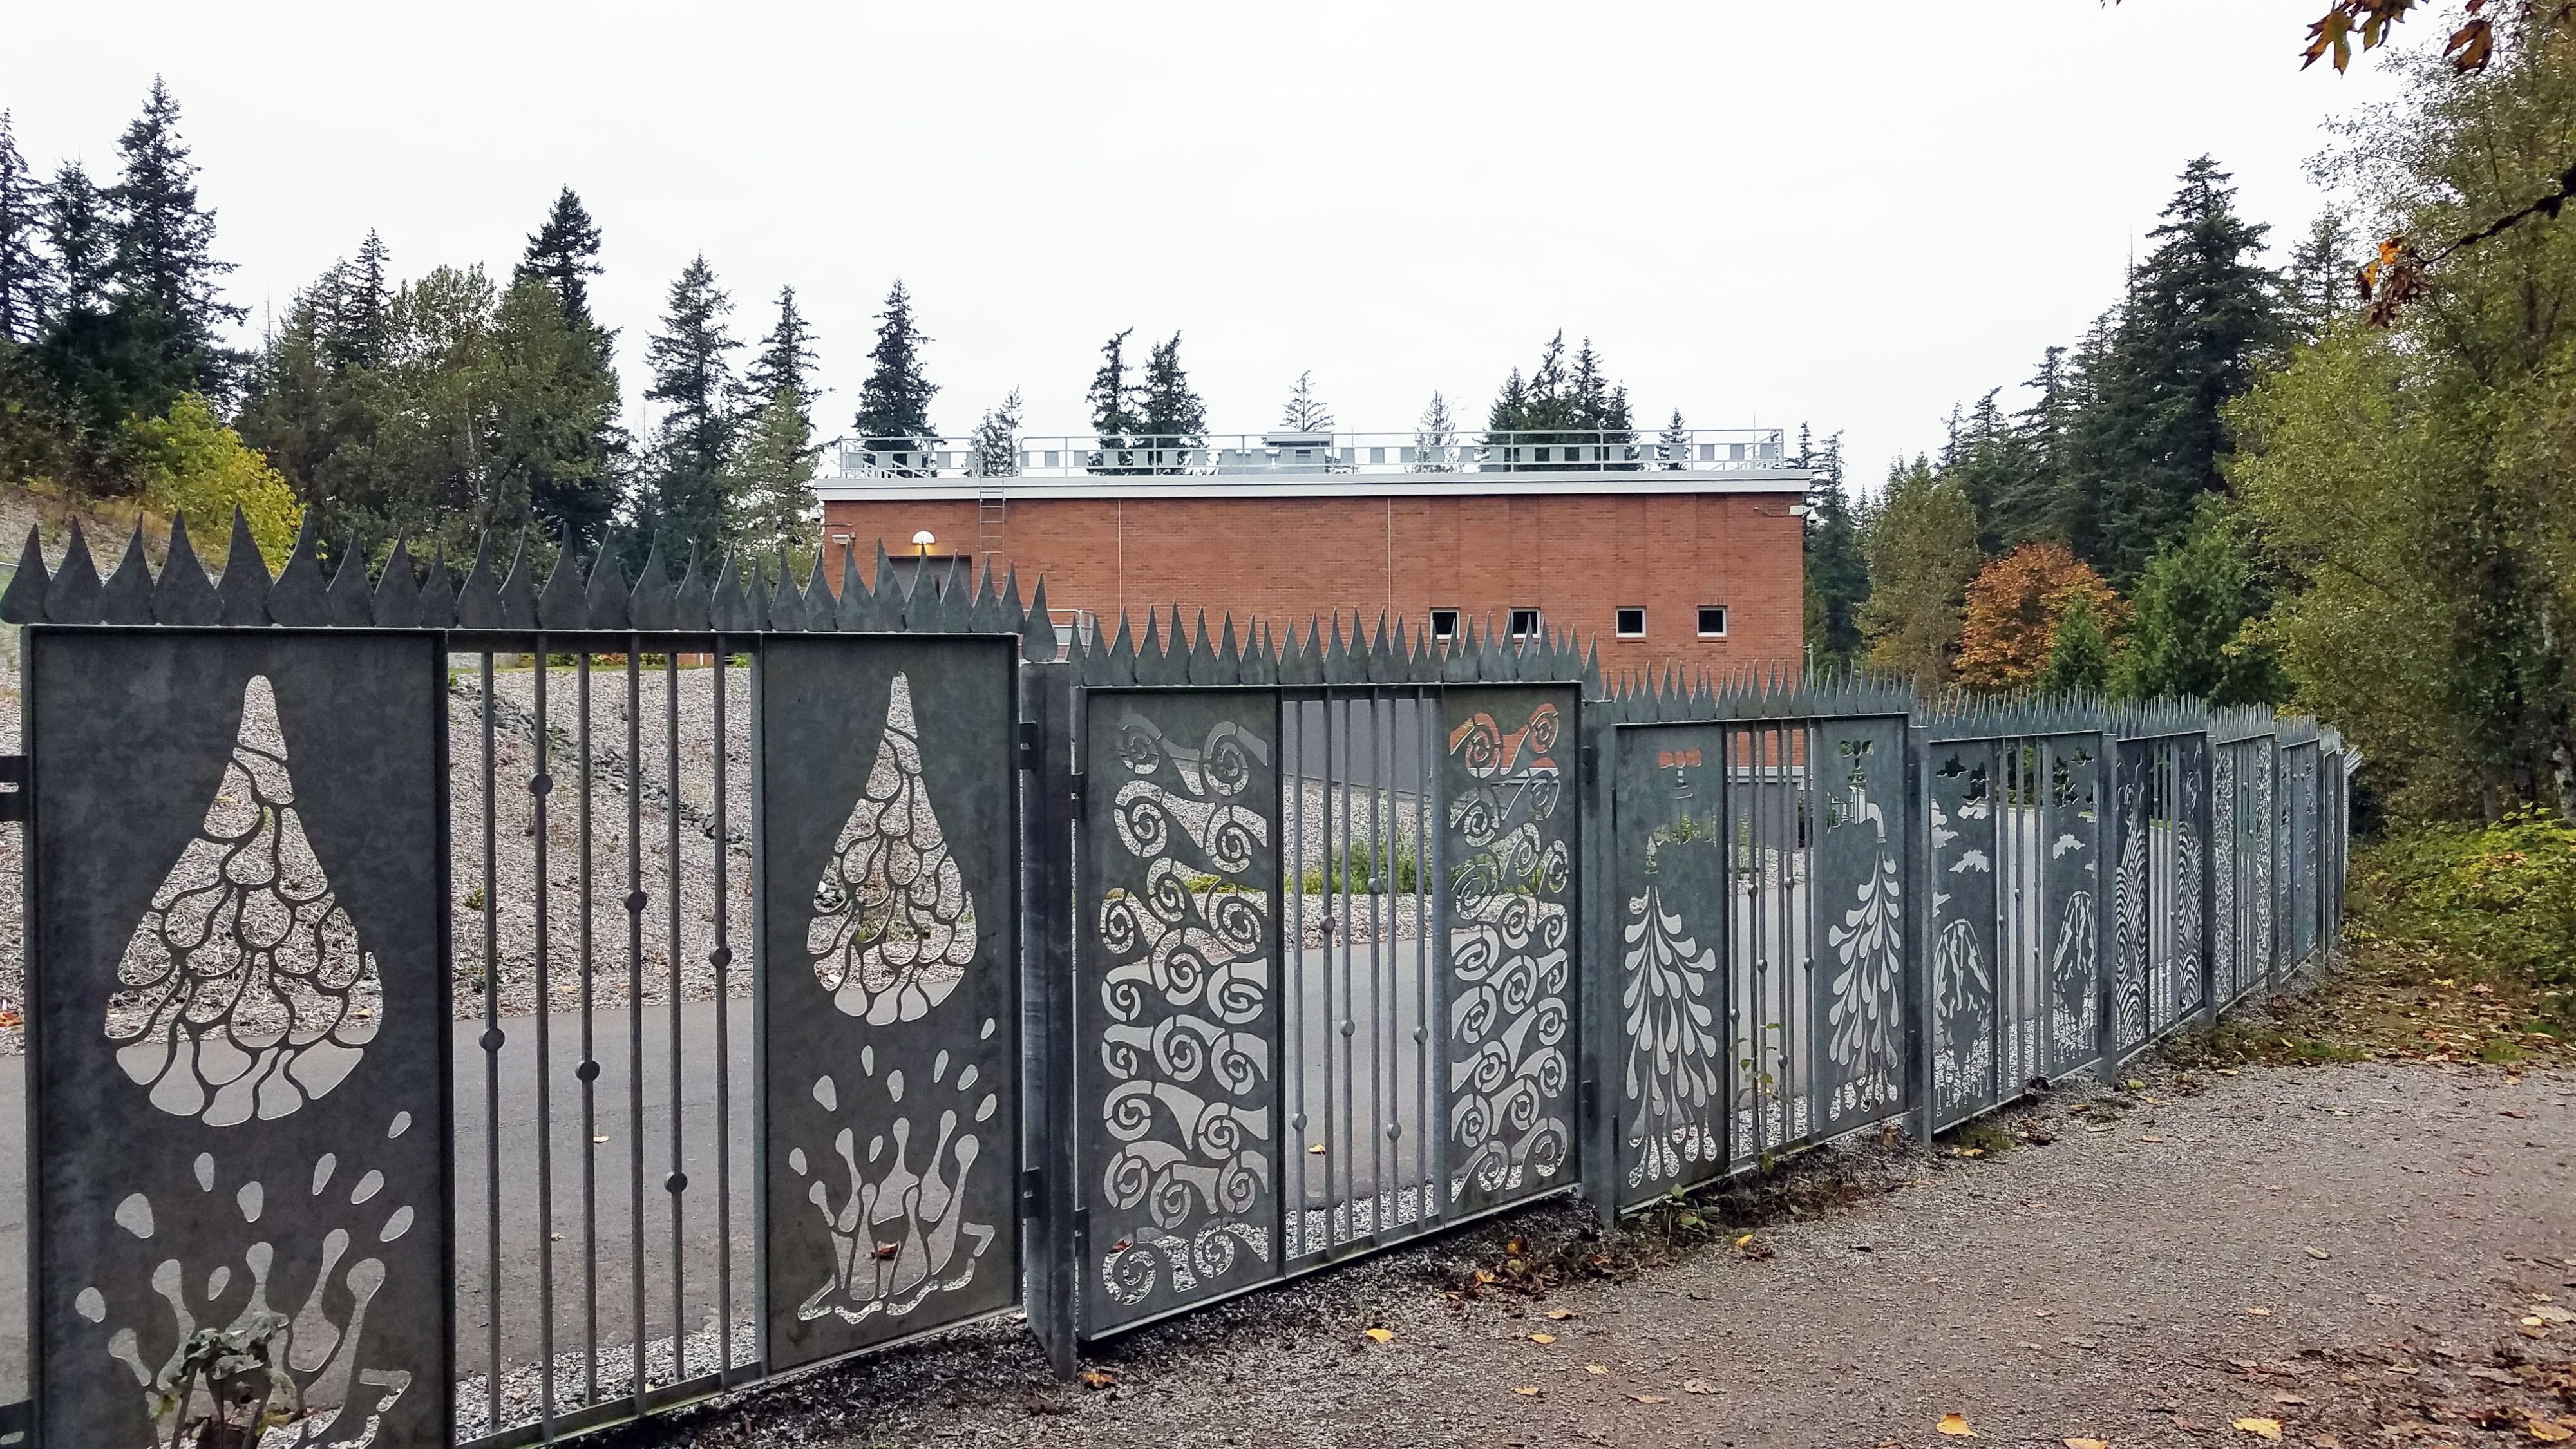 Decorative fence with water treatment plant building in background